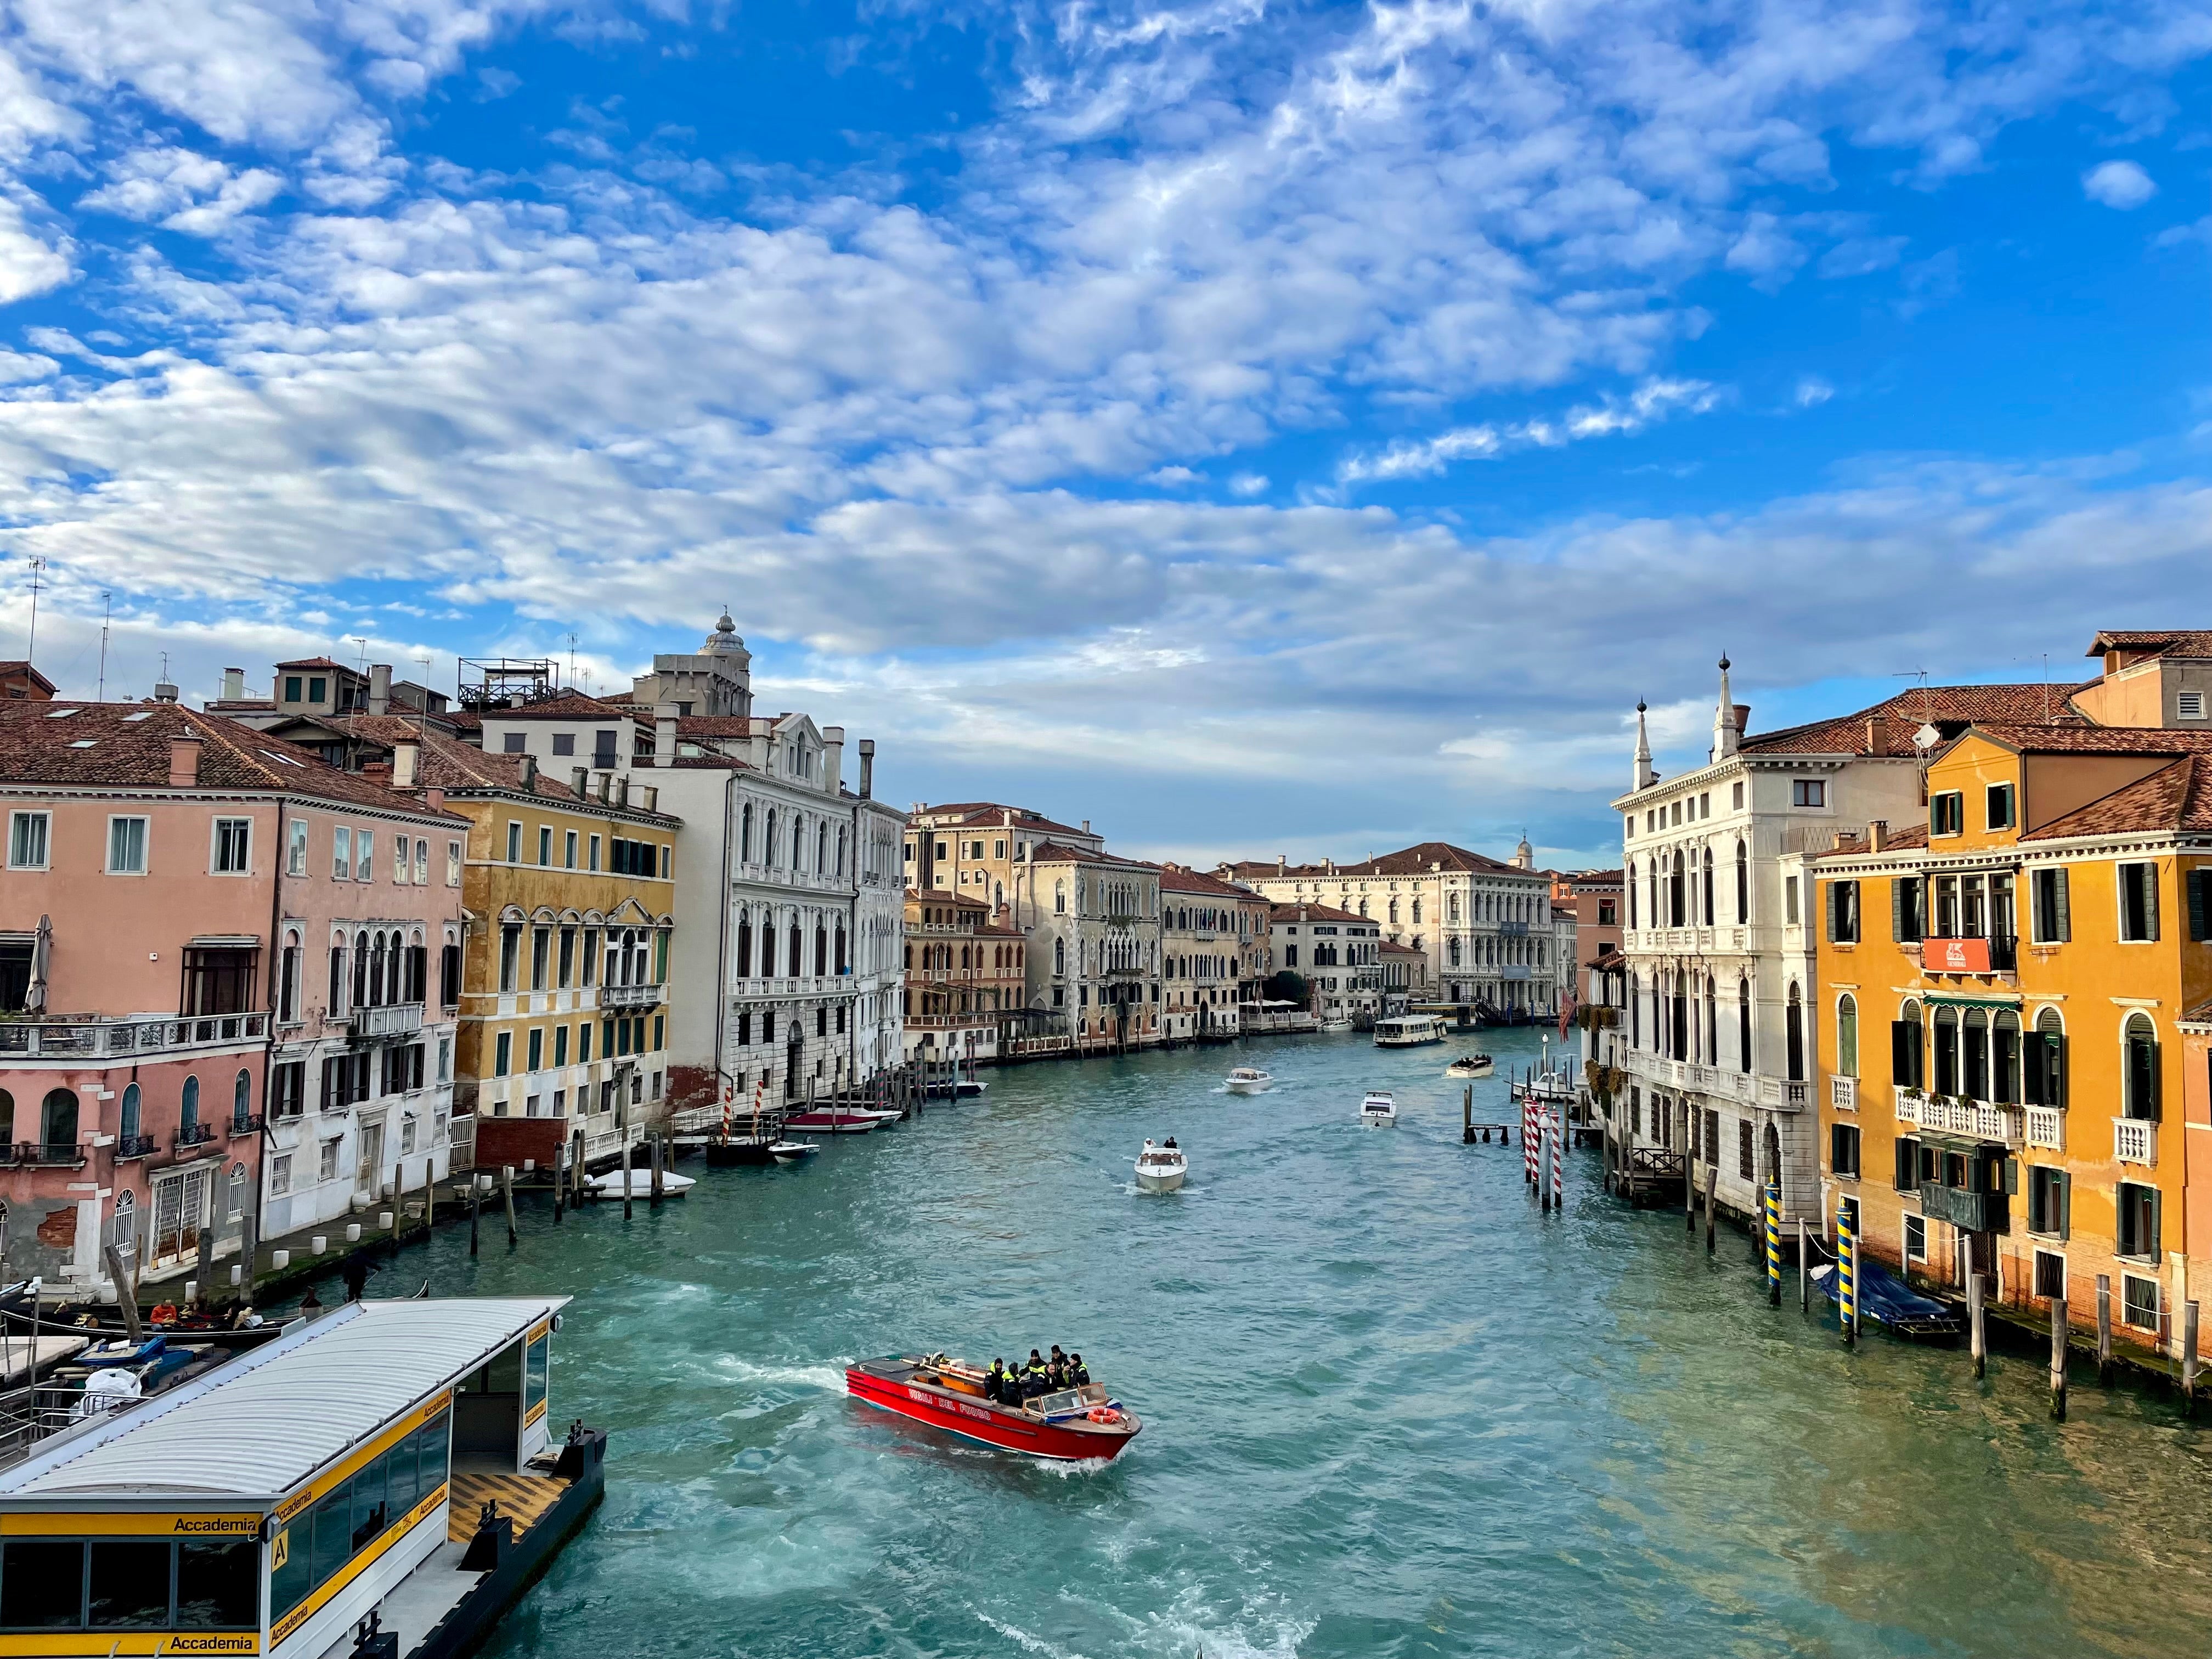 Venice has announced plans to ban loudspeakers and large tourist groups as part of the latest efforts to combat over-tourism in the historical city